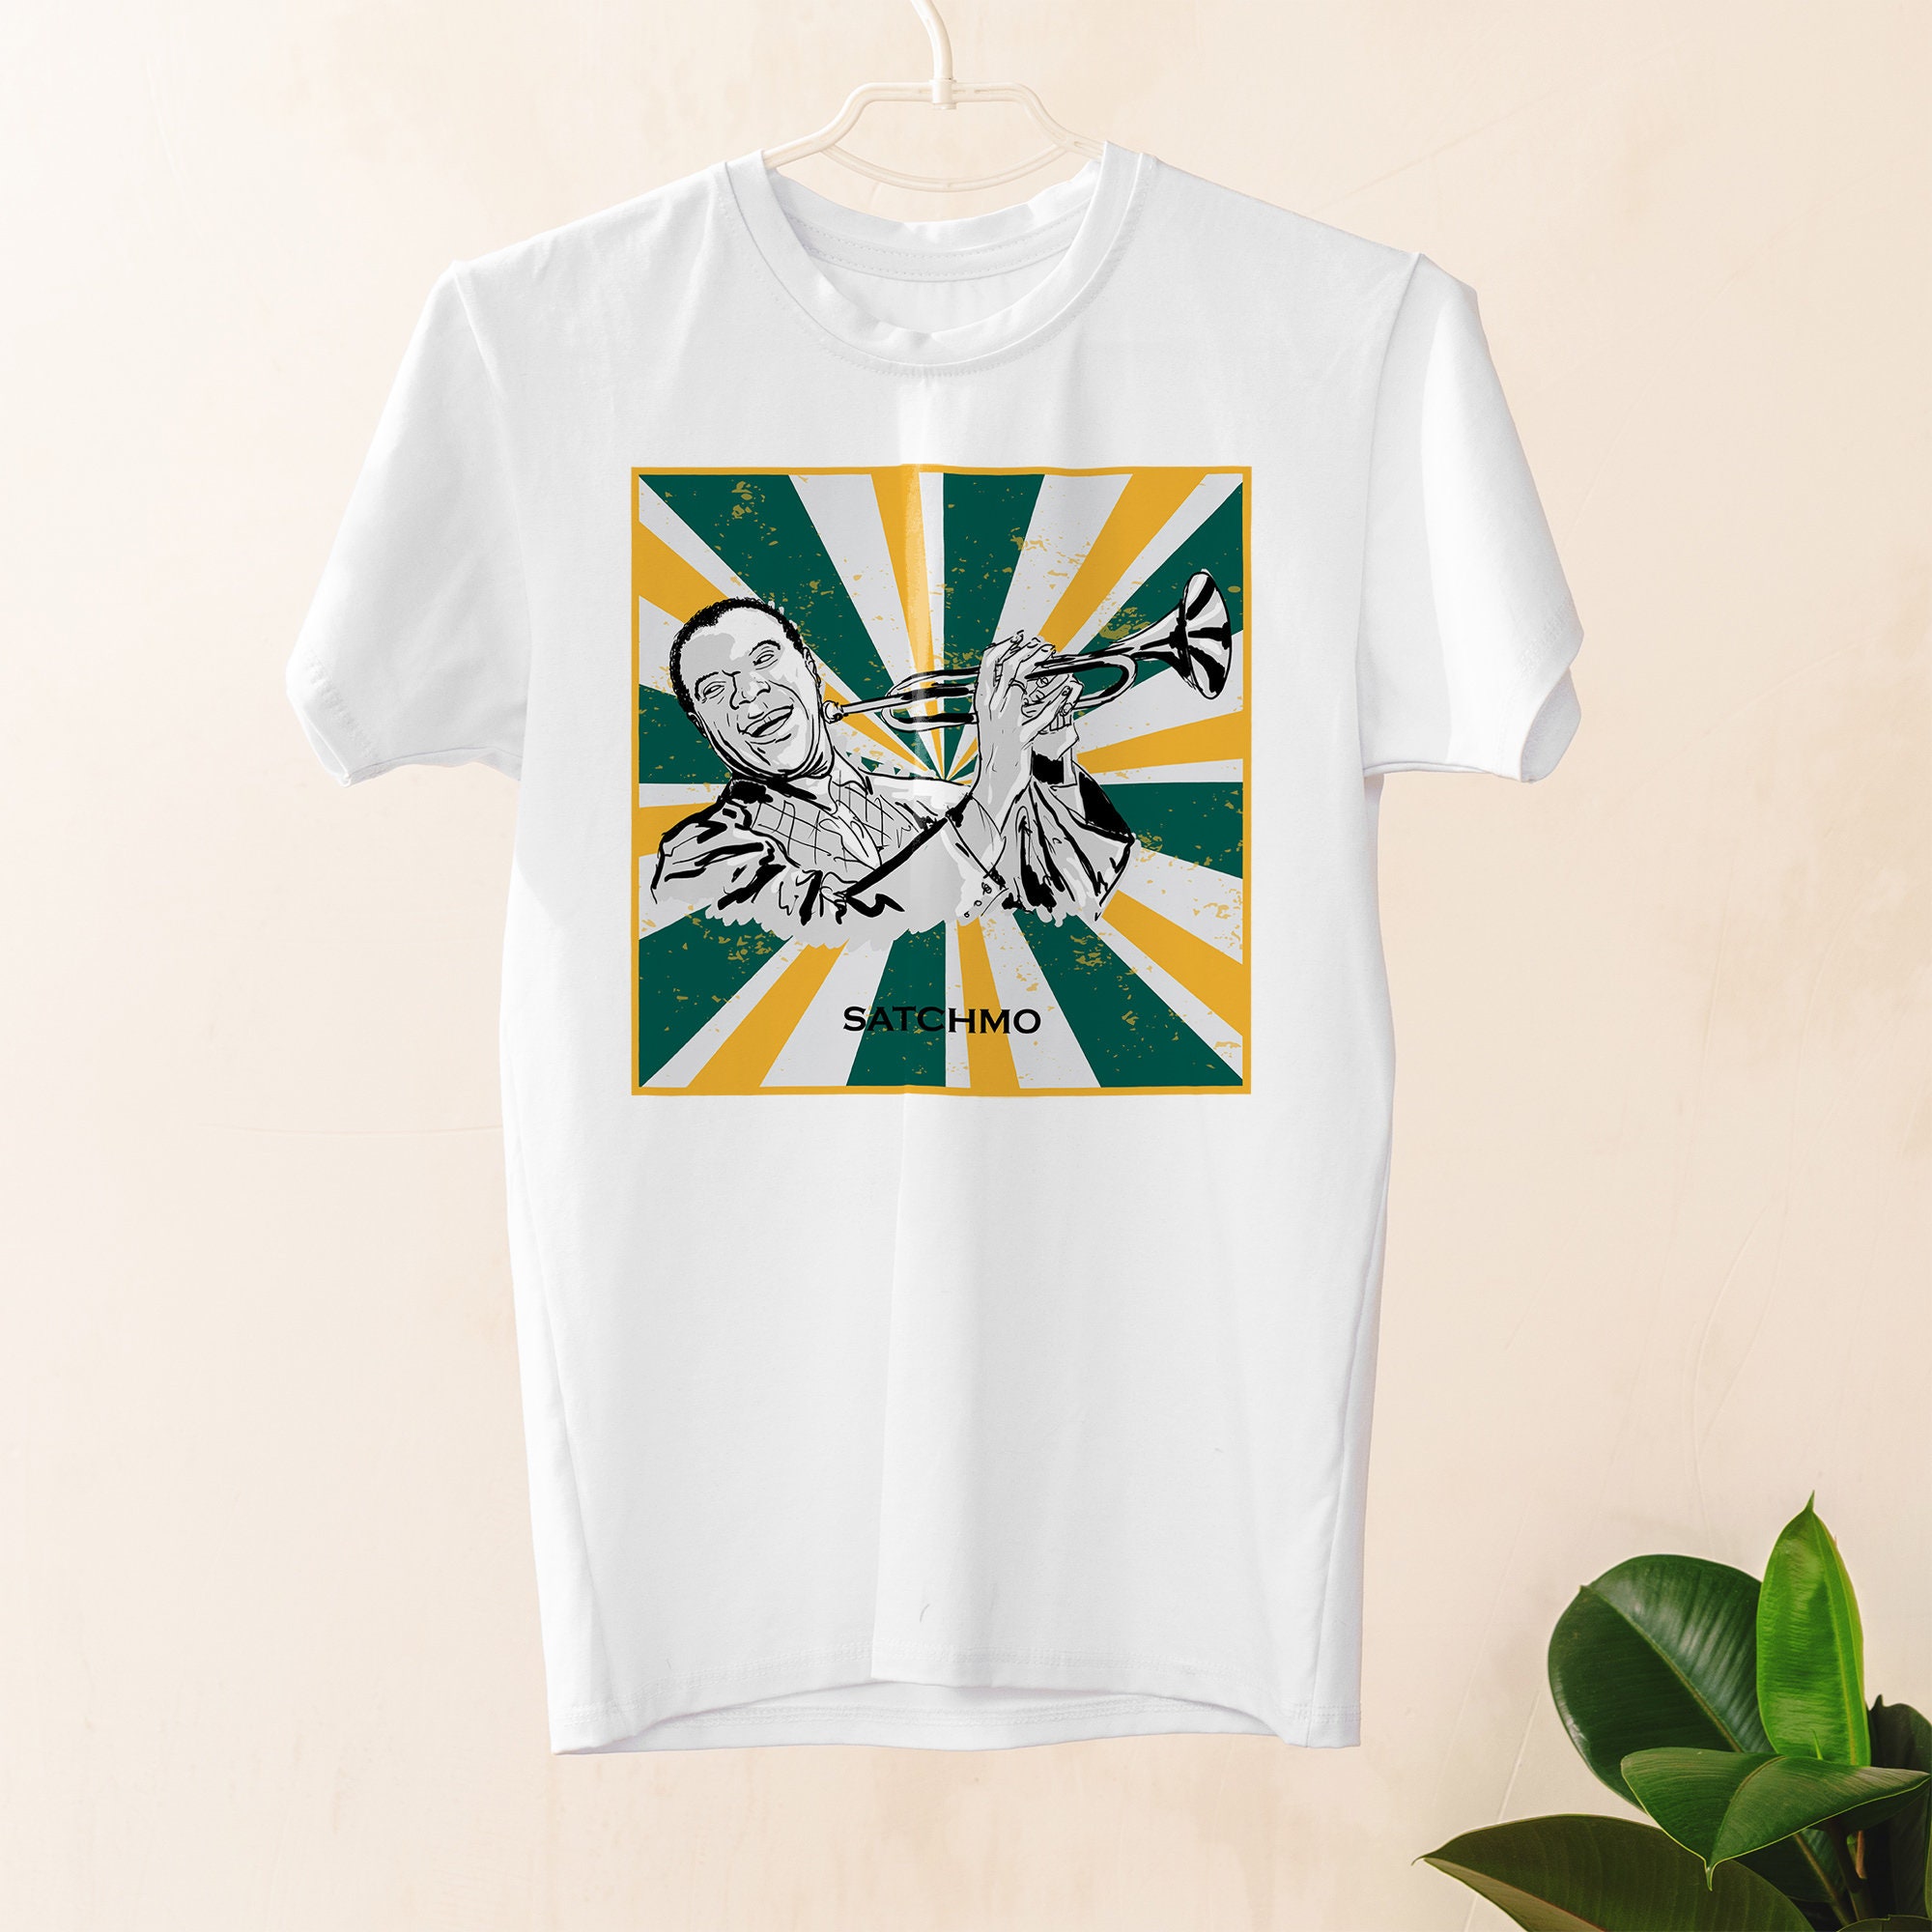 Retro Louis Armstrong Does Not Have A Website Shirt, I Was Telling My Son  About Louis Armstrong Sweatshirt - Family Gift Ideas That Everyone Will  Enjoy